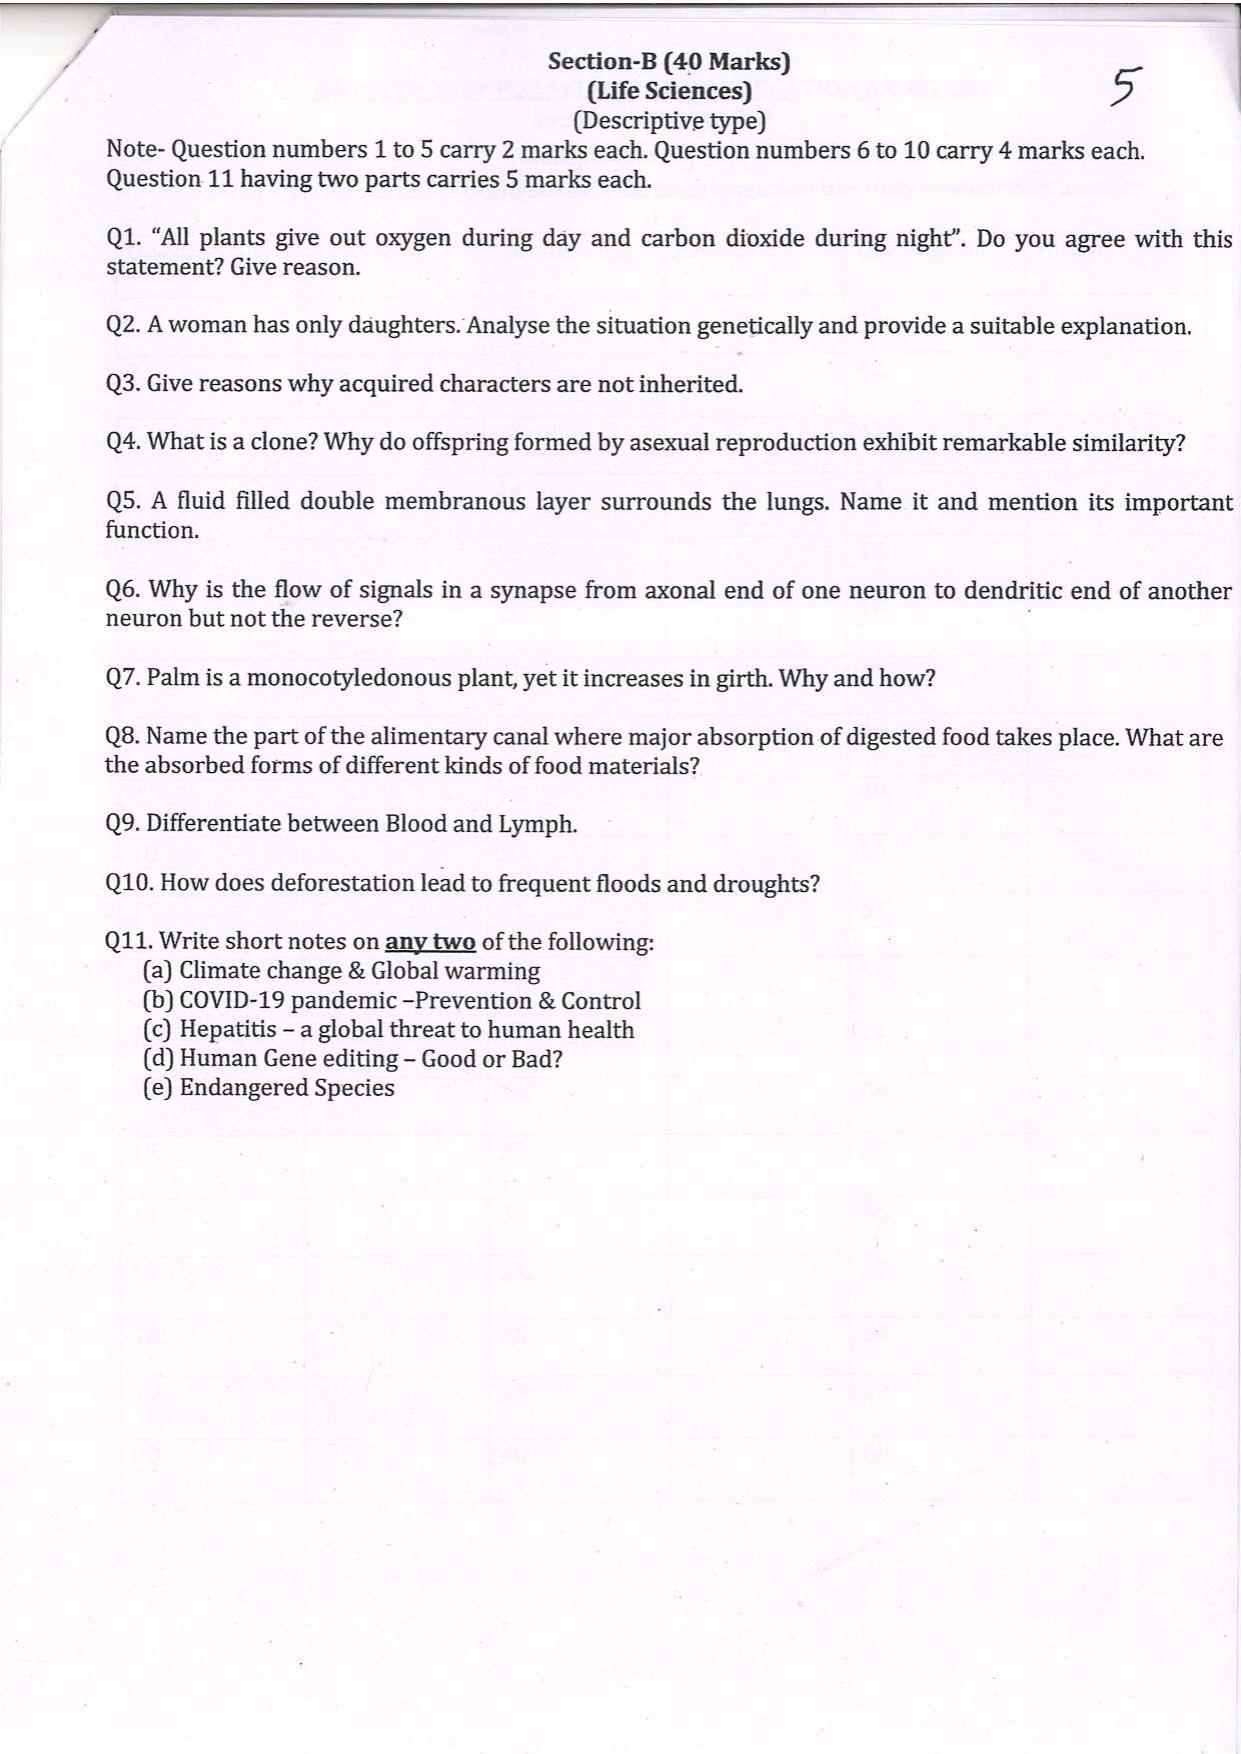 Question Paper of Education Assistant ‘A’ (Life Science) at SC, Bardhaman Advertisement No. 1/2021 - Page 5